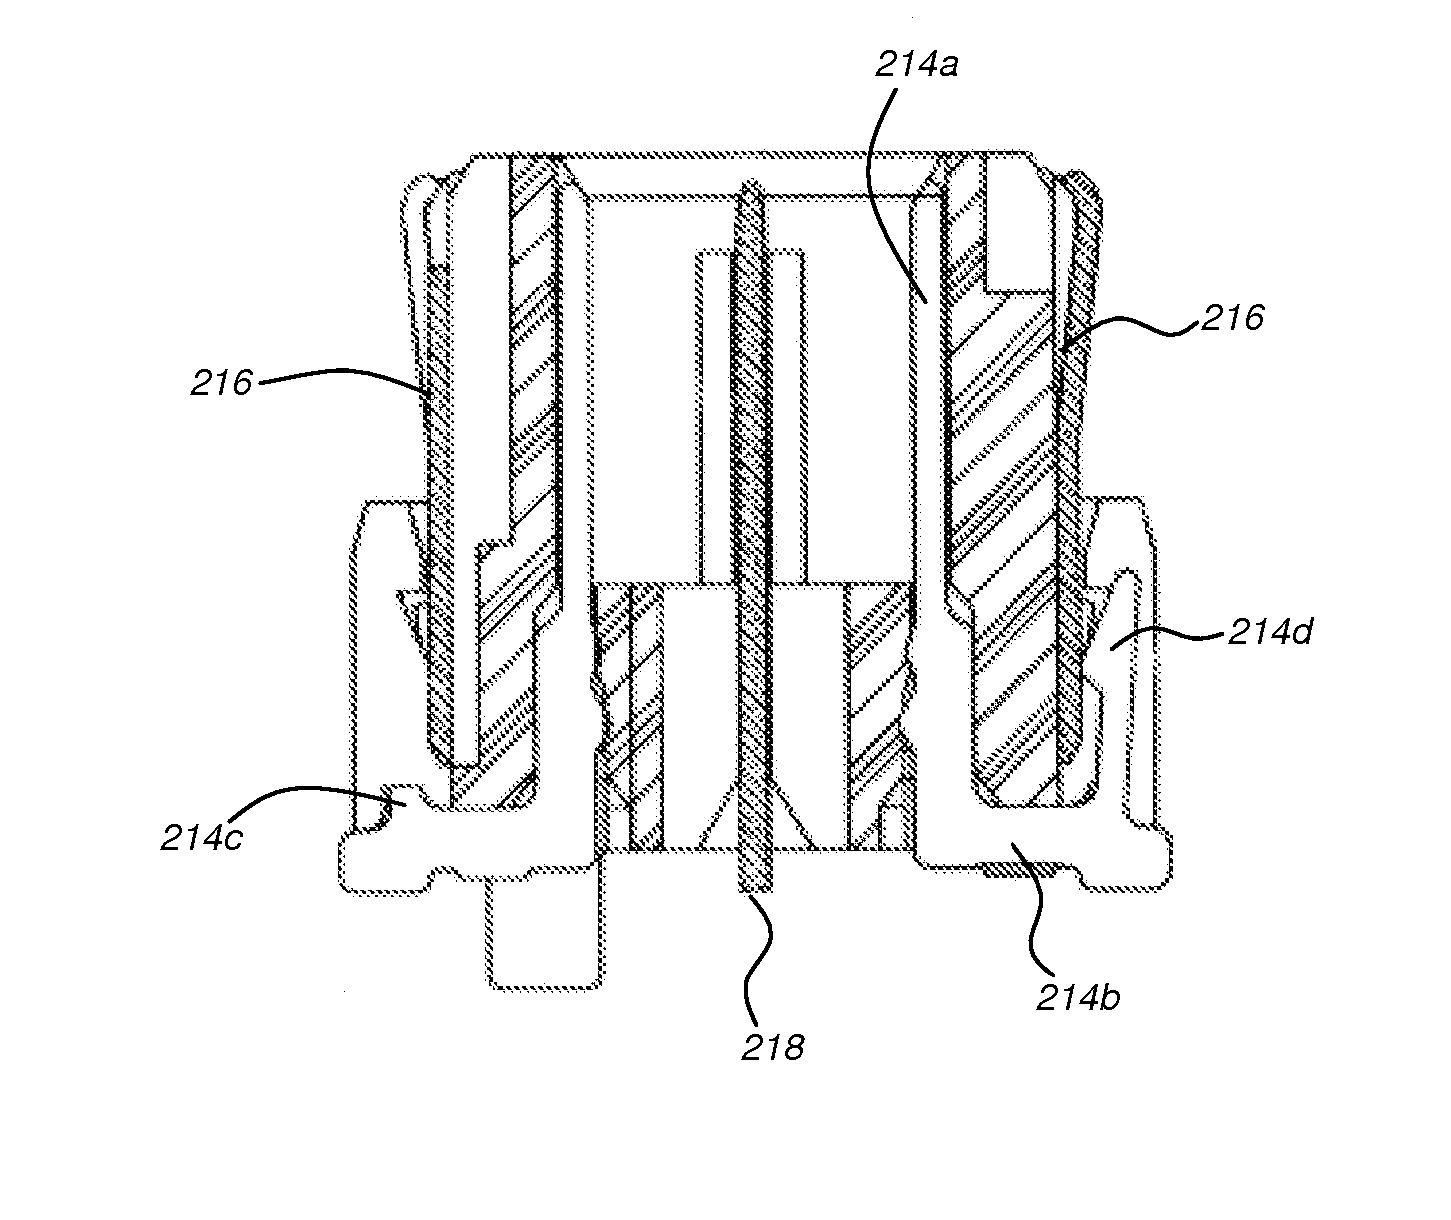 Electrical connector having a ground plane with independently configurable contacts